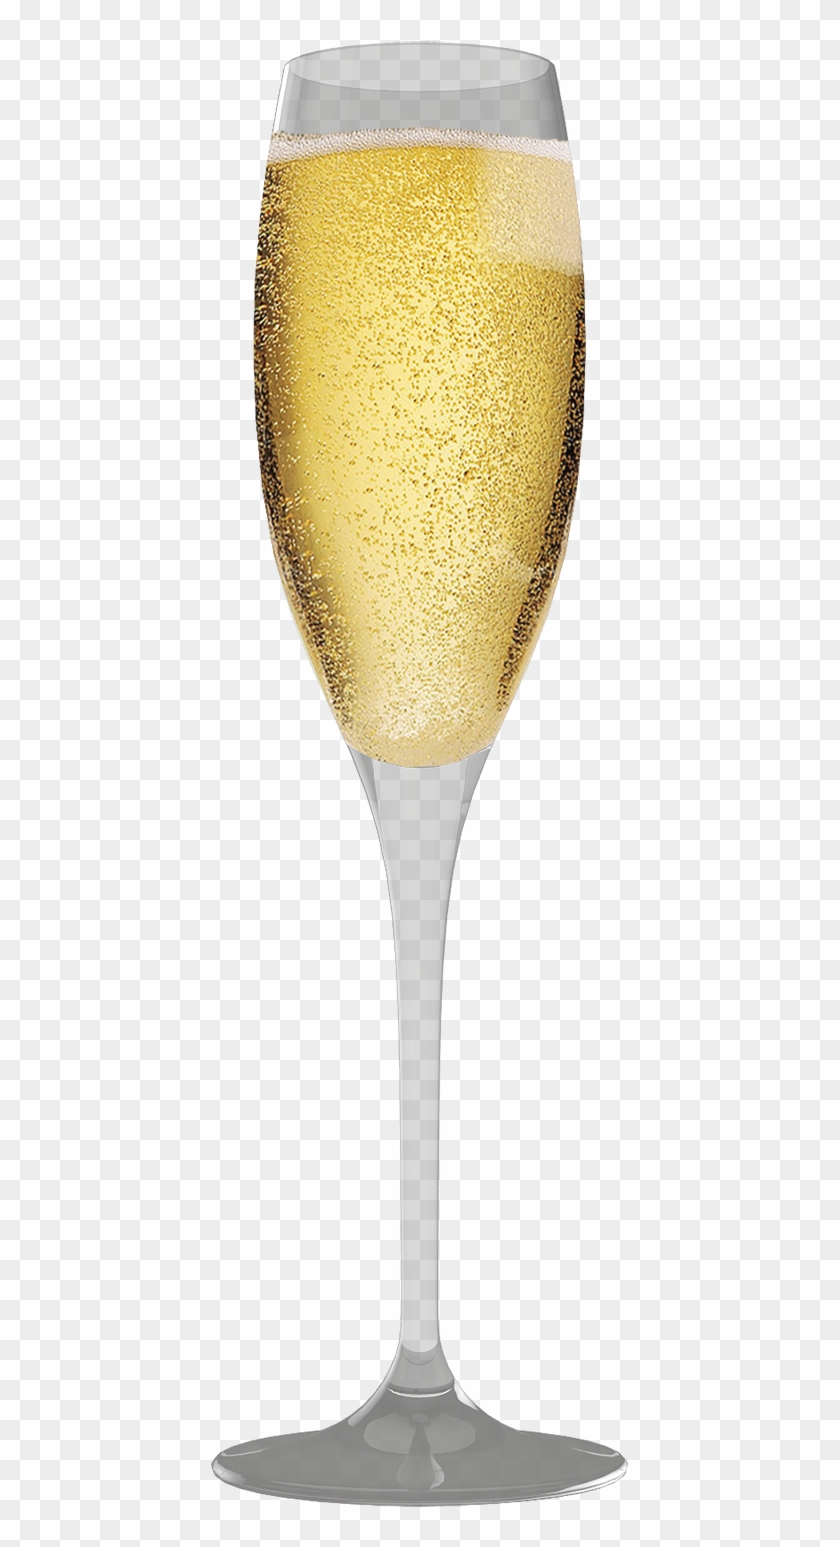 Champagne Glass Png Clip Art - Champagne Stemware Transparent Png #1733930